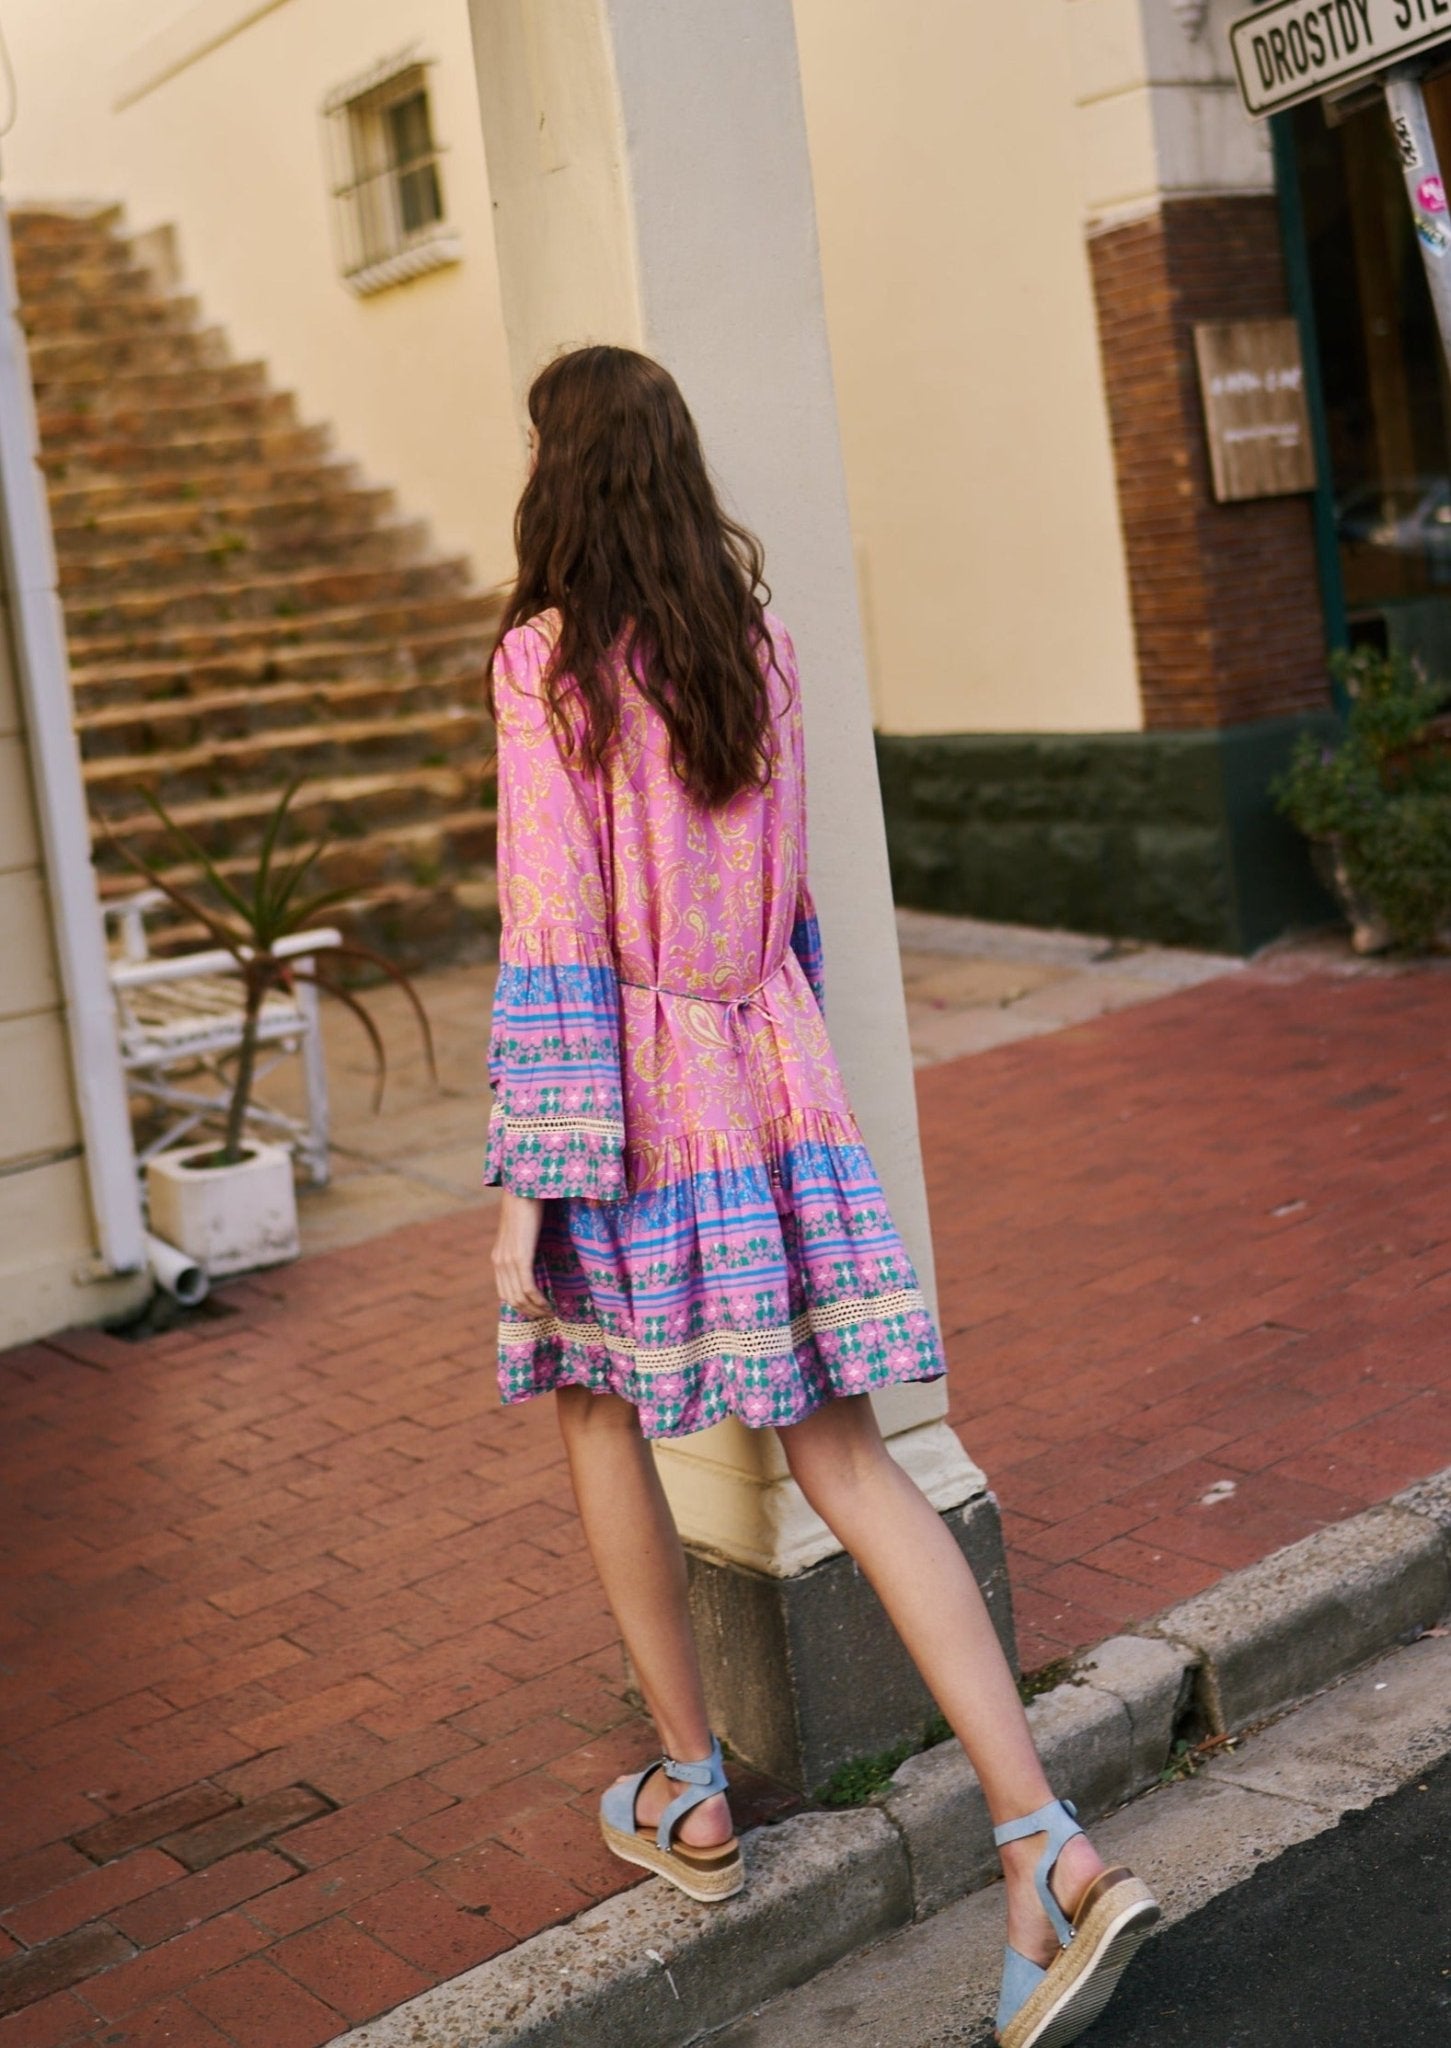 Short Bohemian Dress with Tassels in Hot Pink and Purple - Tribute StoreTRIBUTE